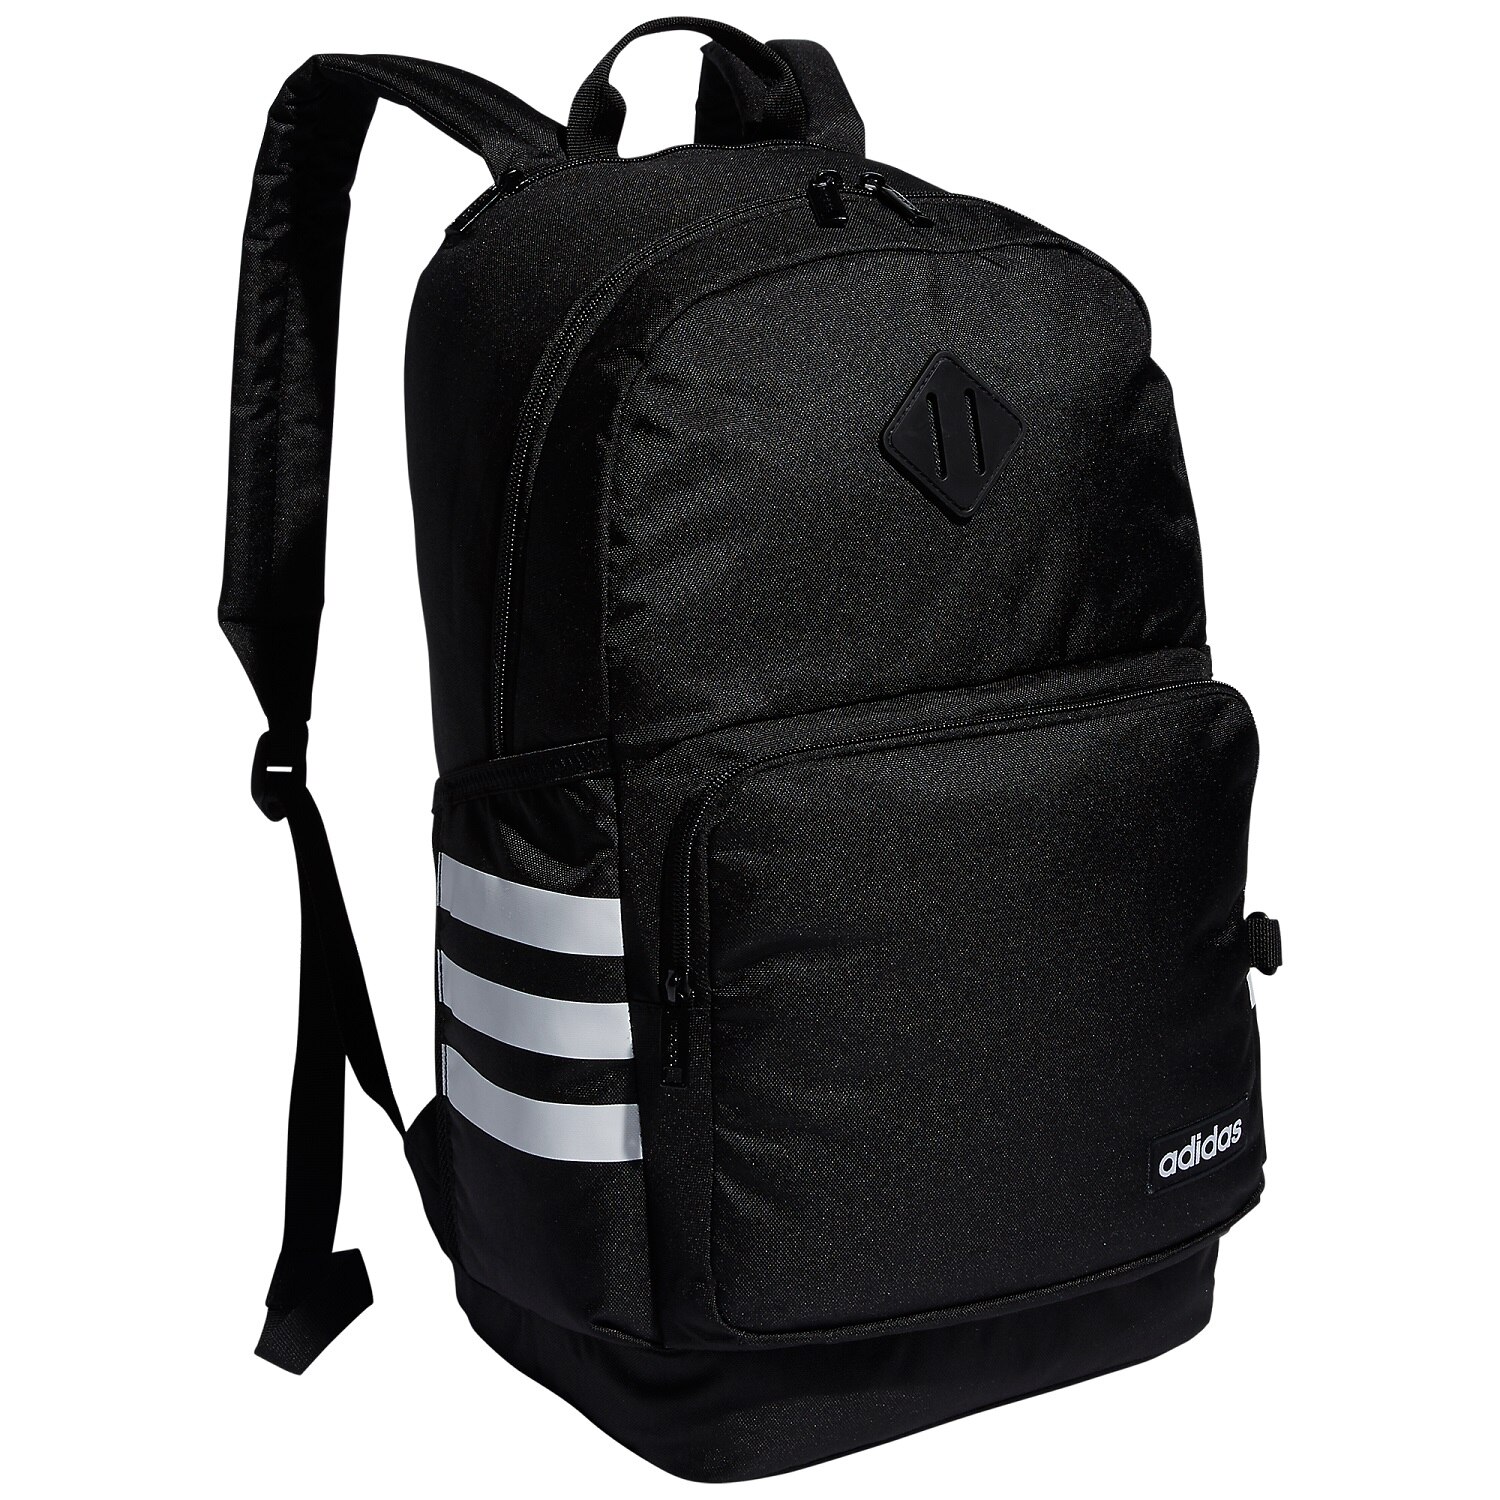 ADIDAS CLASSIC 3S 4 BACKPACK